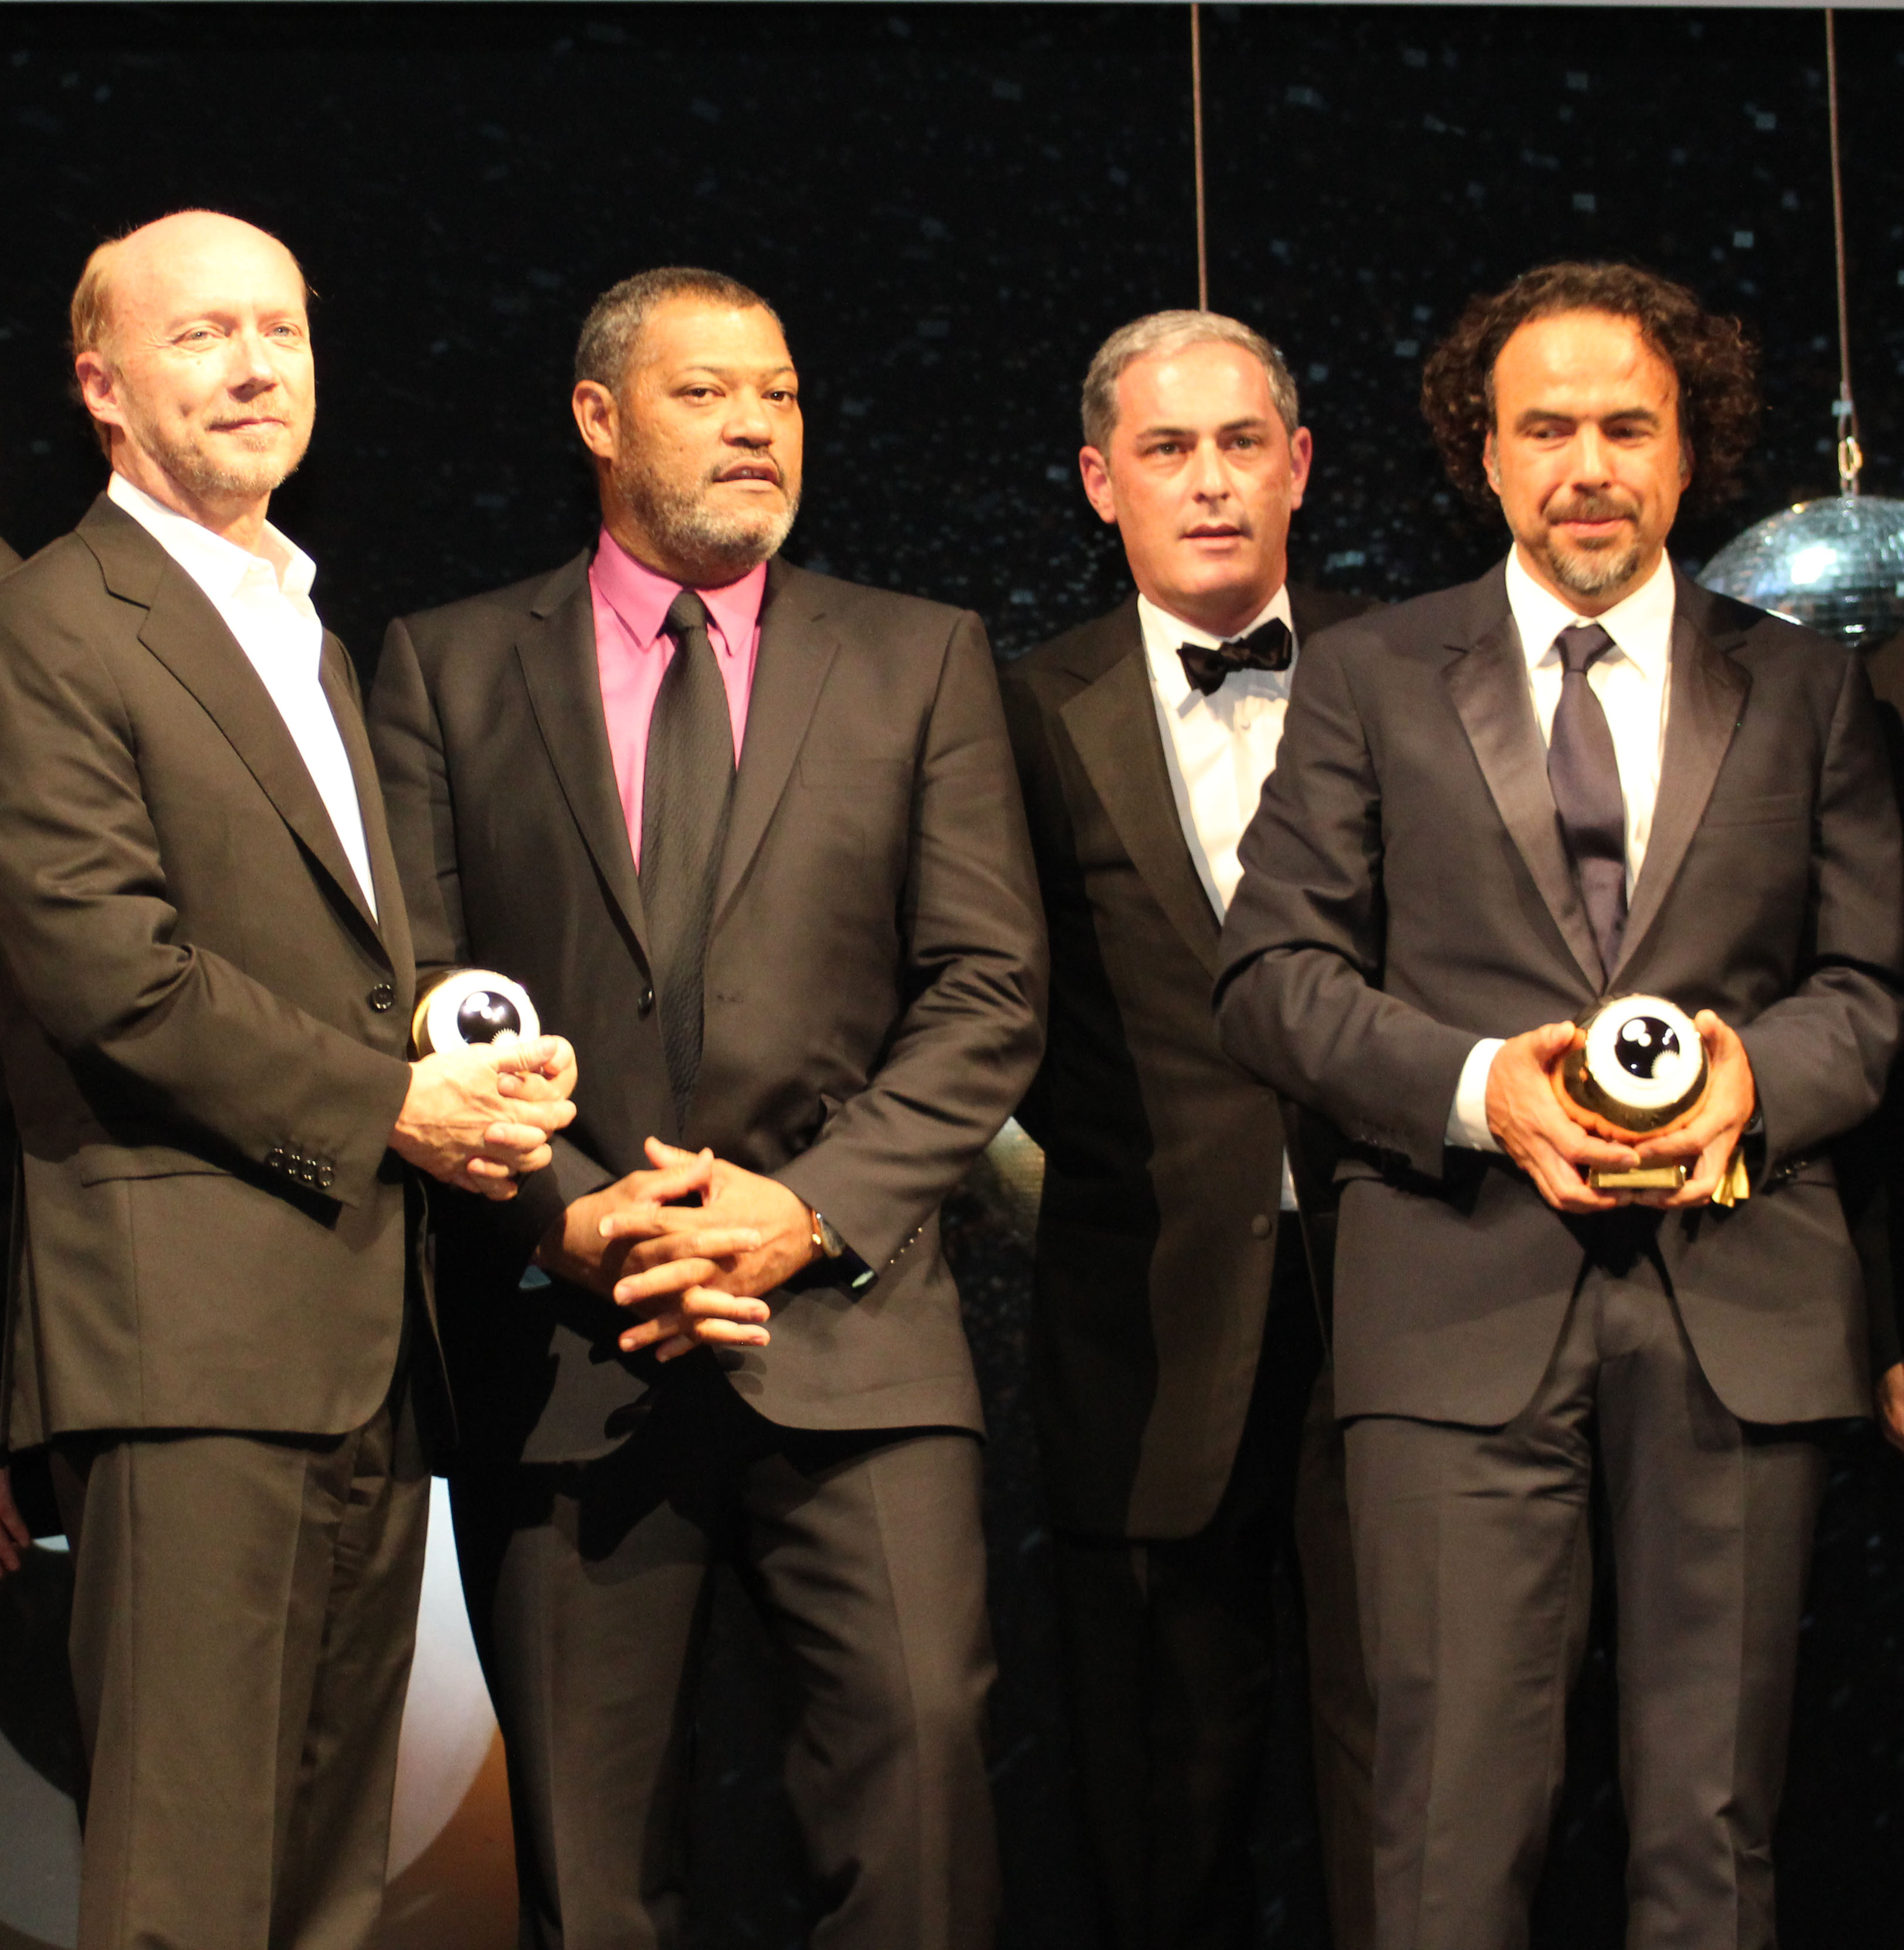 Paul Haggis (L) and Alejandro Gonzalez Inarritu (R) with their Golden Eyes at the closing ceremony of ZFF 2011